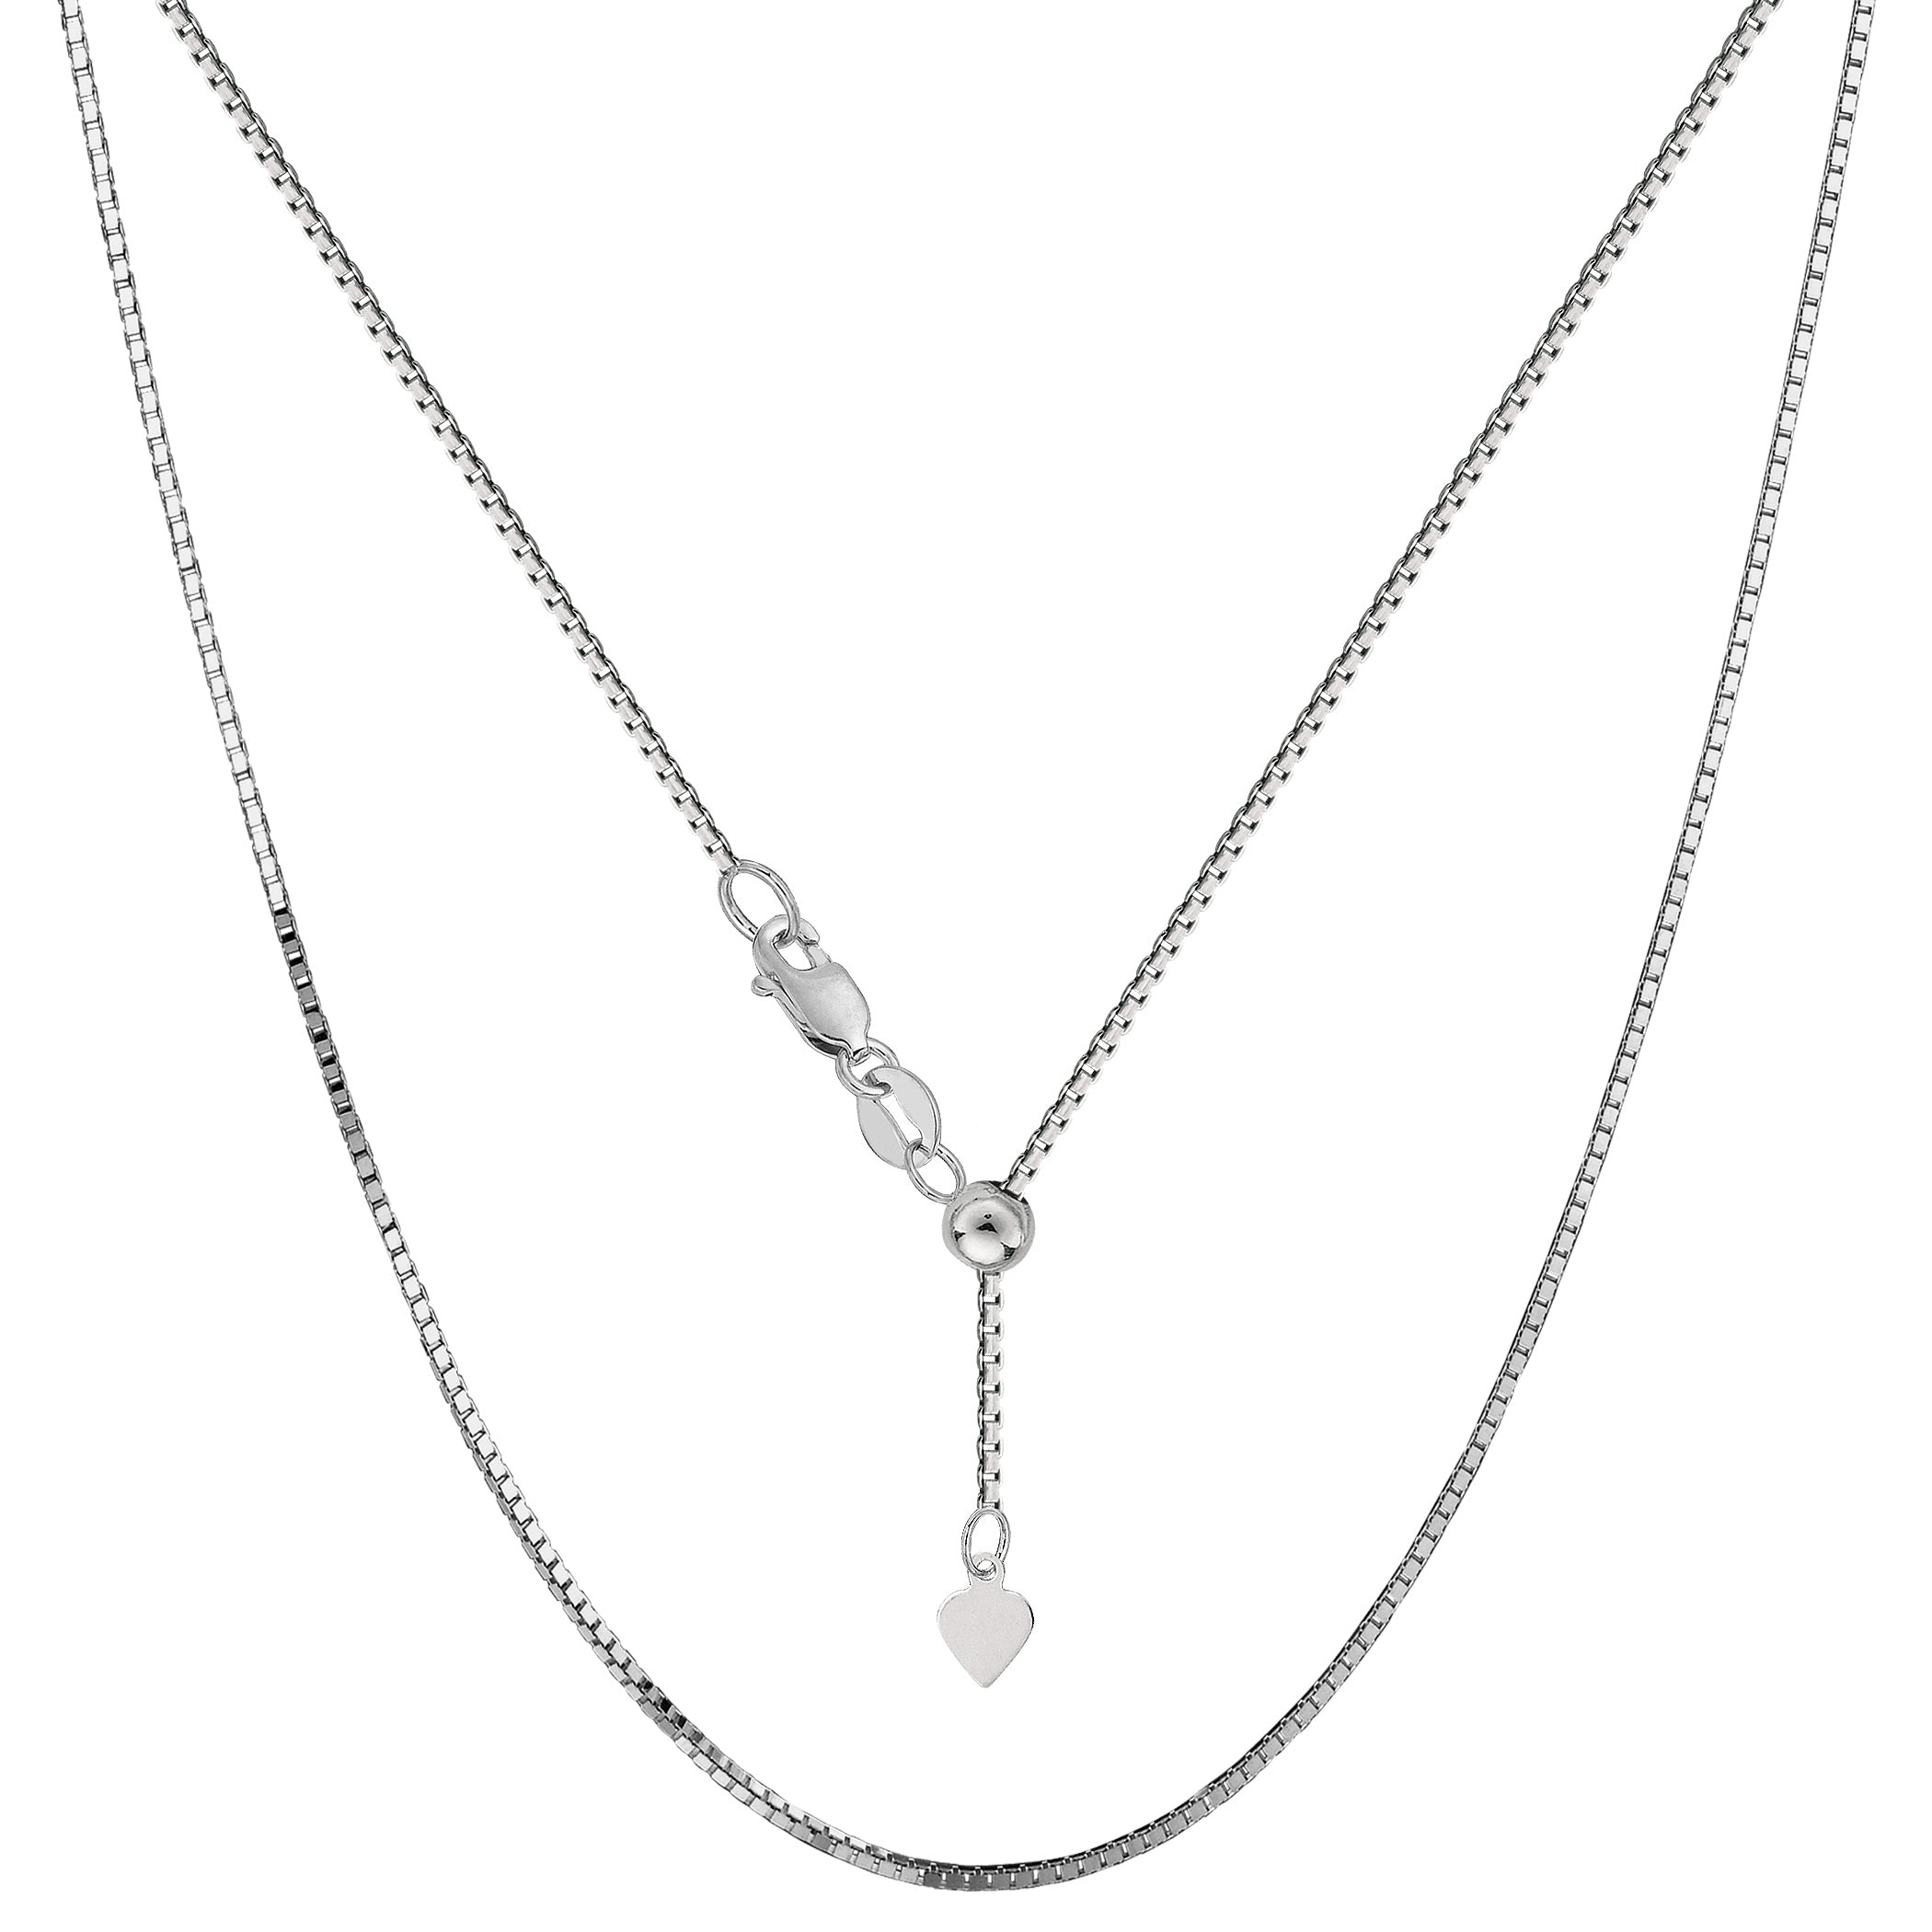 10k White Gold Adjustable Box Link Chain Necklace, 0.85mm, 22"